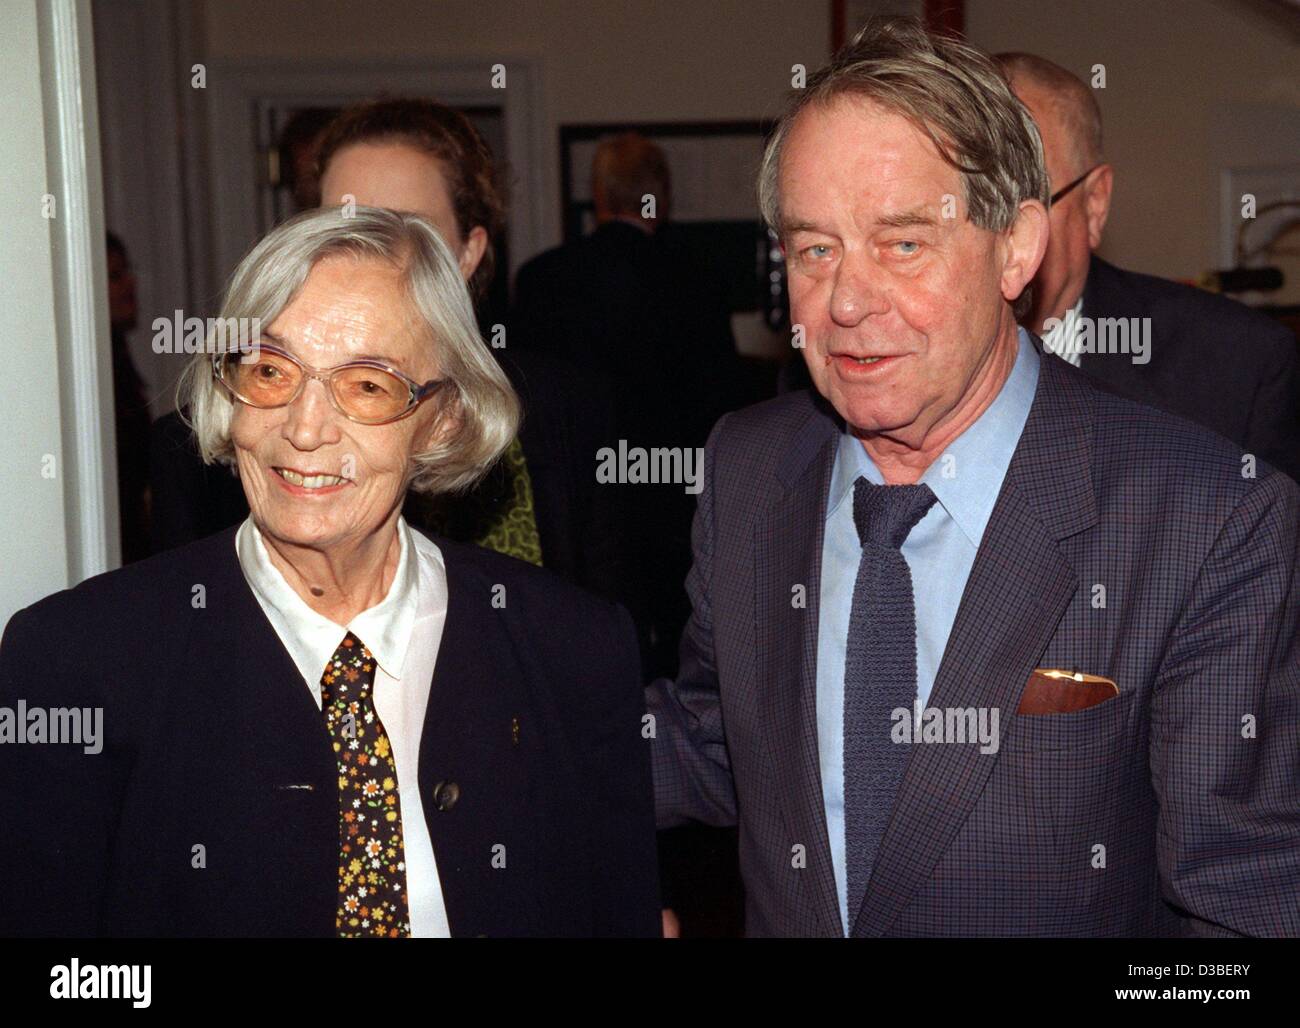 (dpa files) - German author Siegfried Lenz and his wife Lieselotte are attending the presentation of former chancellor Helmut Schmidt's book 'Weggefaehrten' (companions), Hamburg, 17 September 1996. Lenz counts among the most read German post war authors, his most famous work being 'The German Lesso Stock Photo